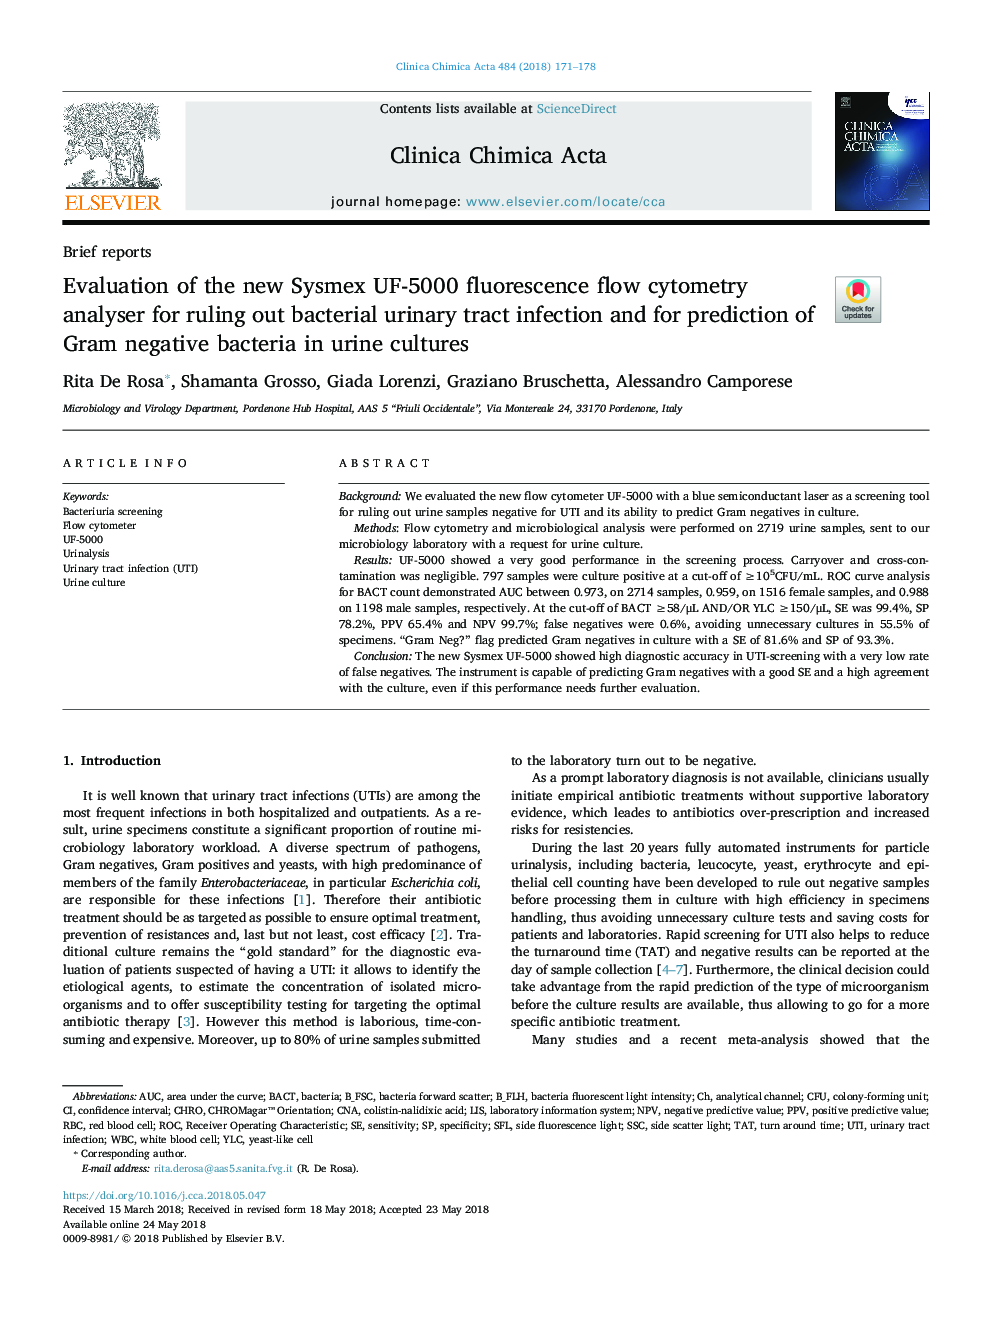 Evaluation of the new Sysmex UF-5000 fluorescence flow cytometry analyser for ruling out bacterial urinary tract infection and for prediction of Gram negative bacteria in urine cultures